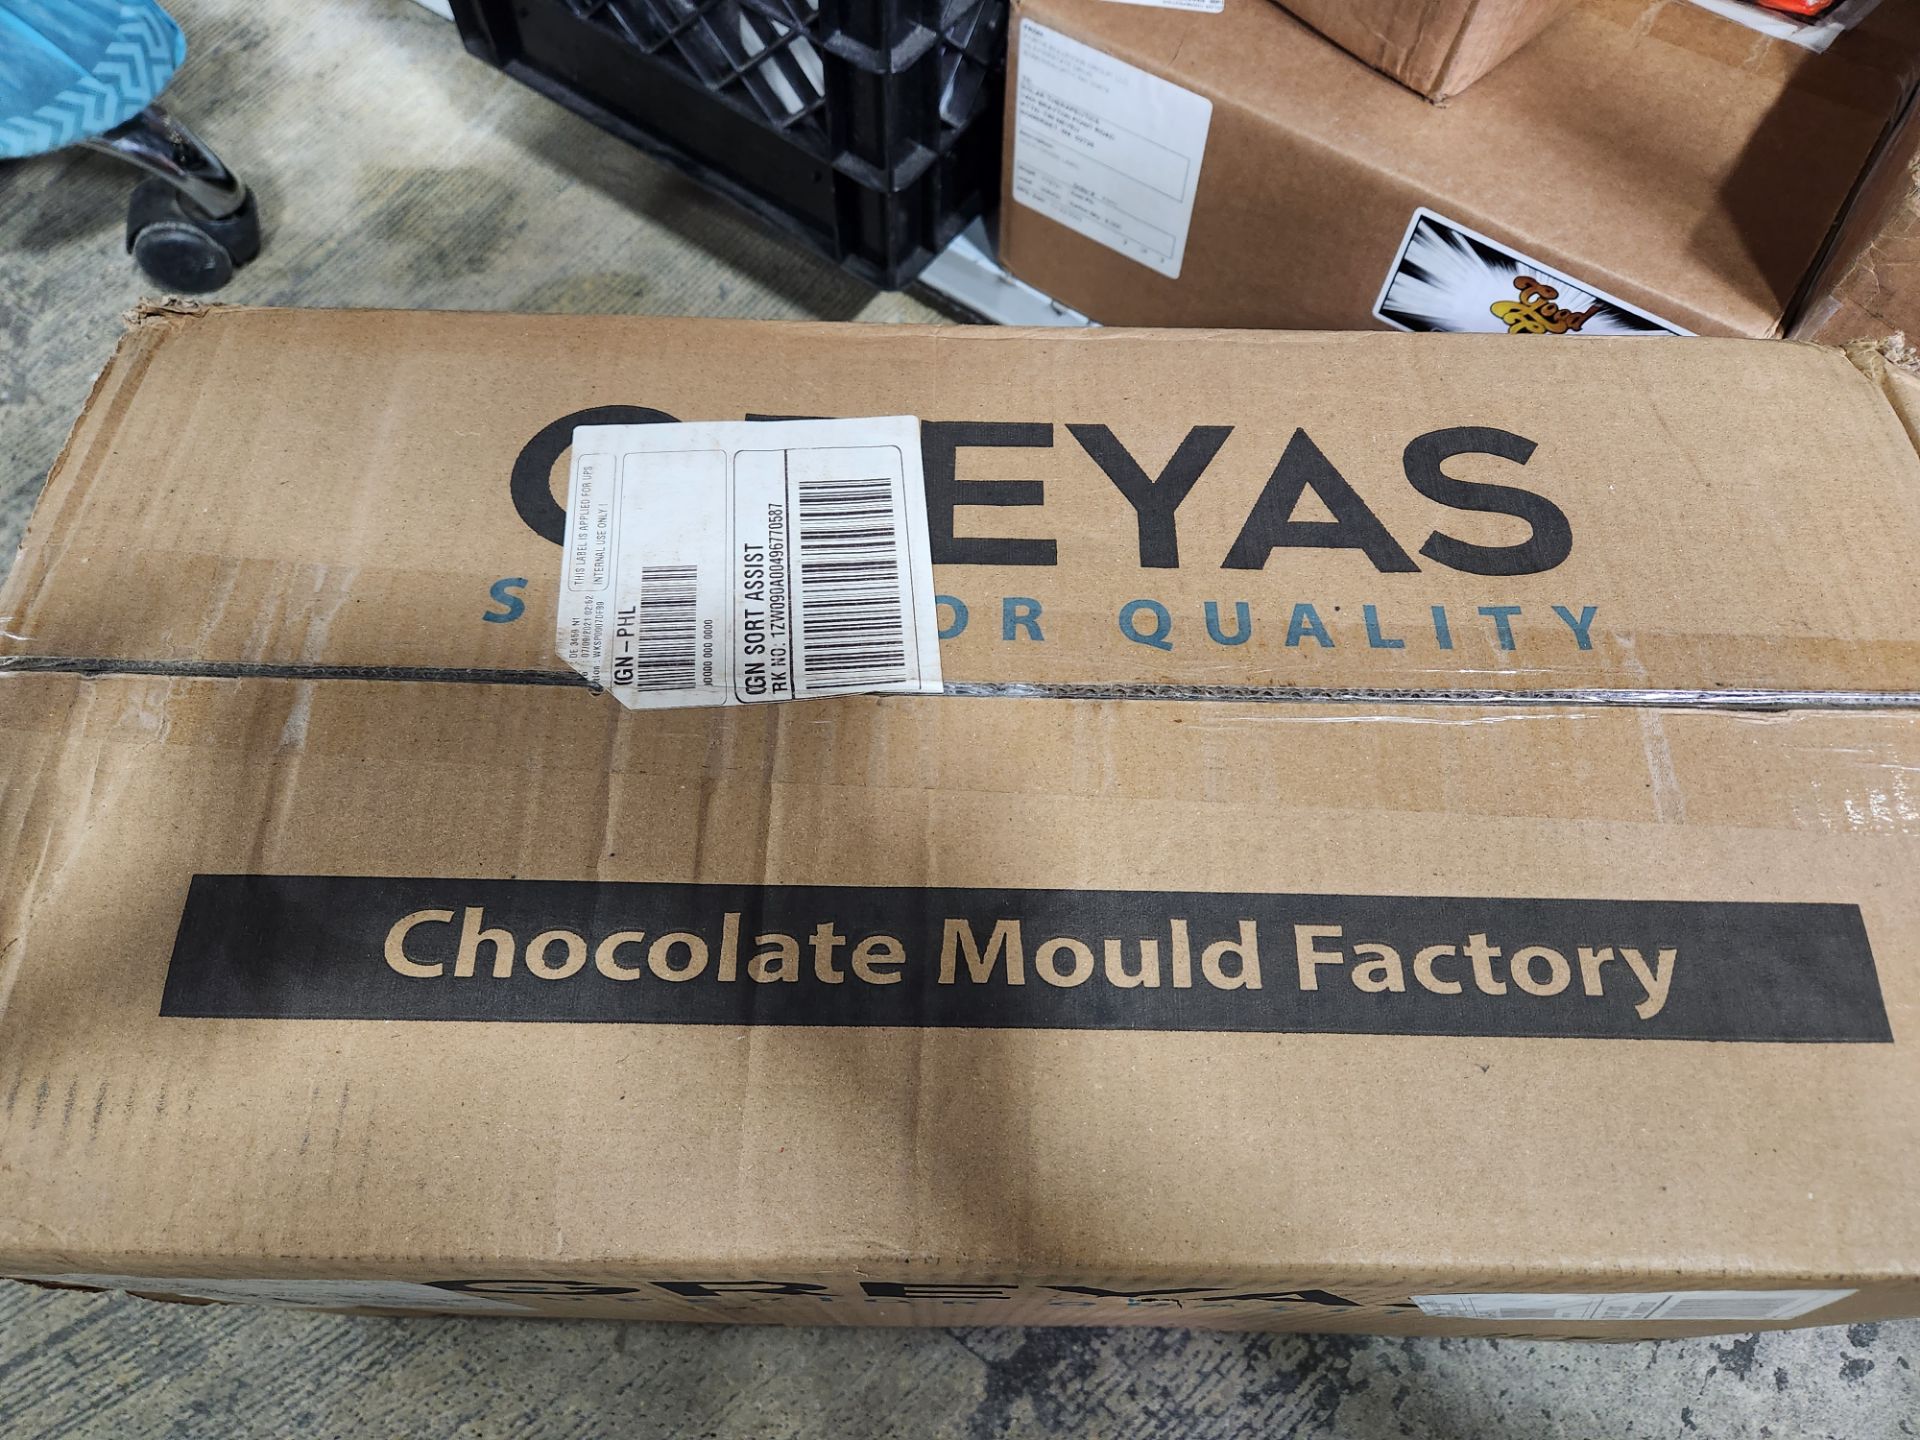 (Located in Somerset, MA) Greyas Chocolate Moulds, 10 Cases/ 300 Moulds Total - Image 4 of 4